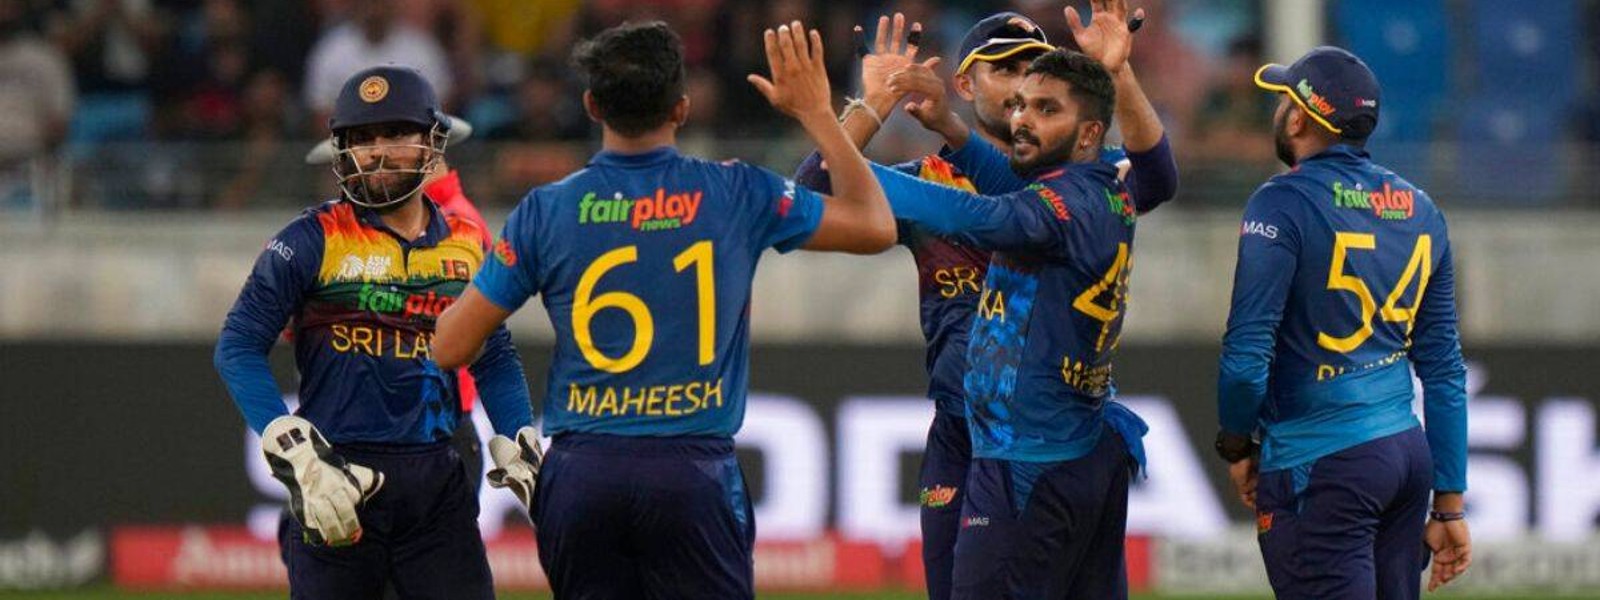 Sri Lanka to face off against Pakistan in Asia Cup Finals